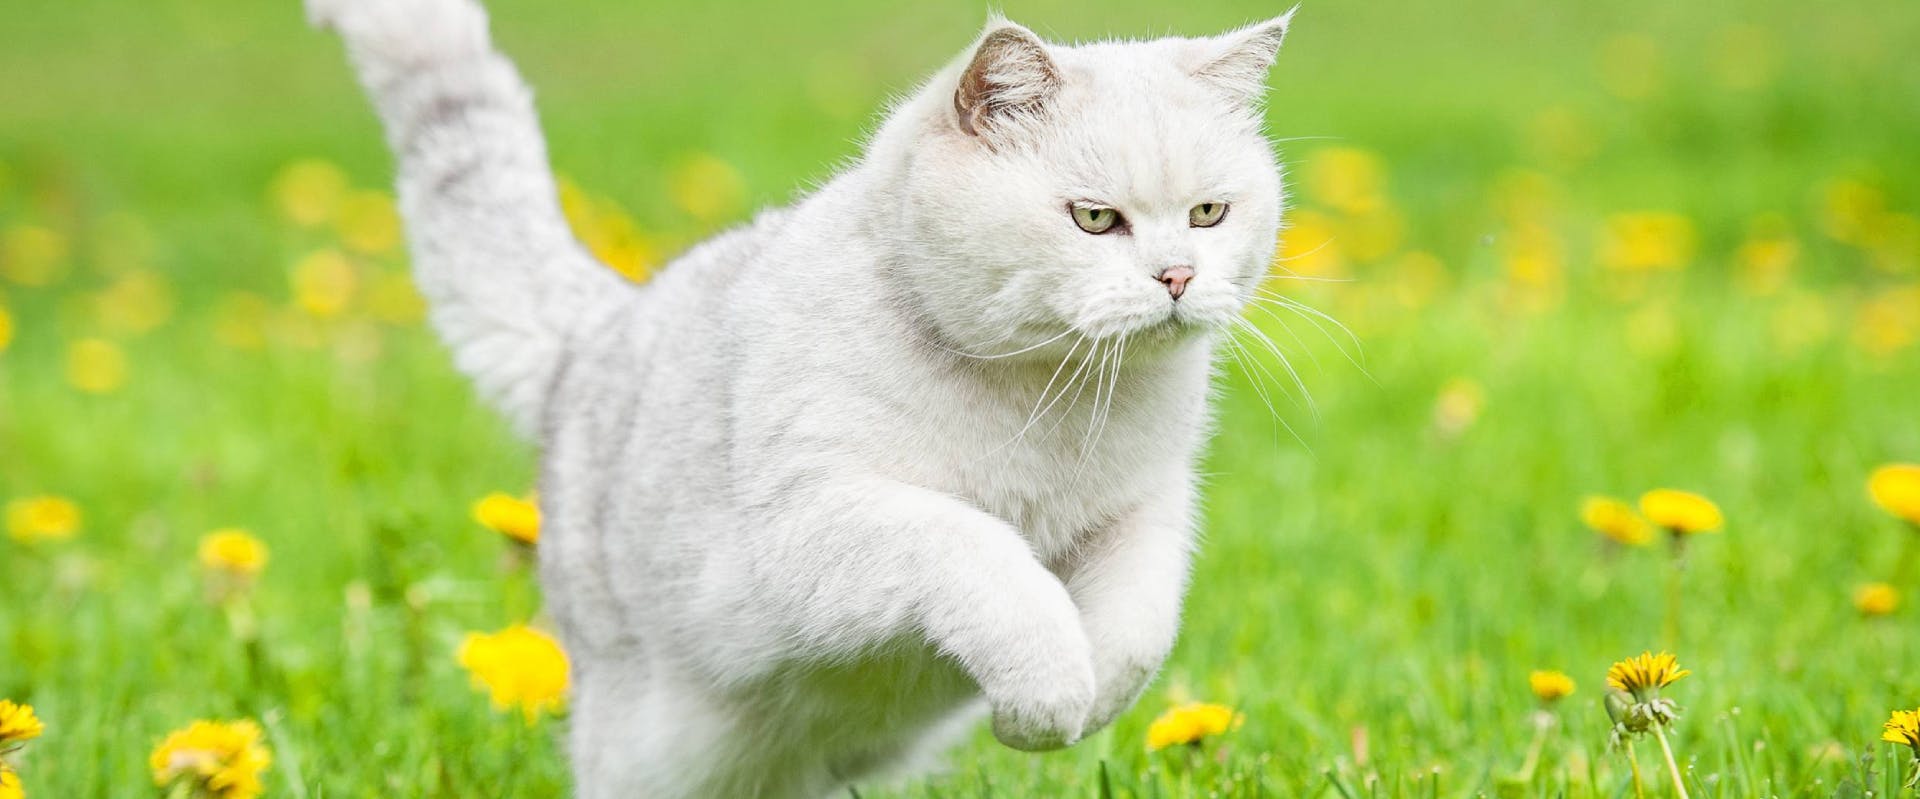 fluffy white cat jumping through a grass field of dandelions